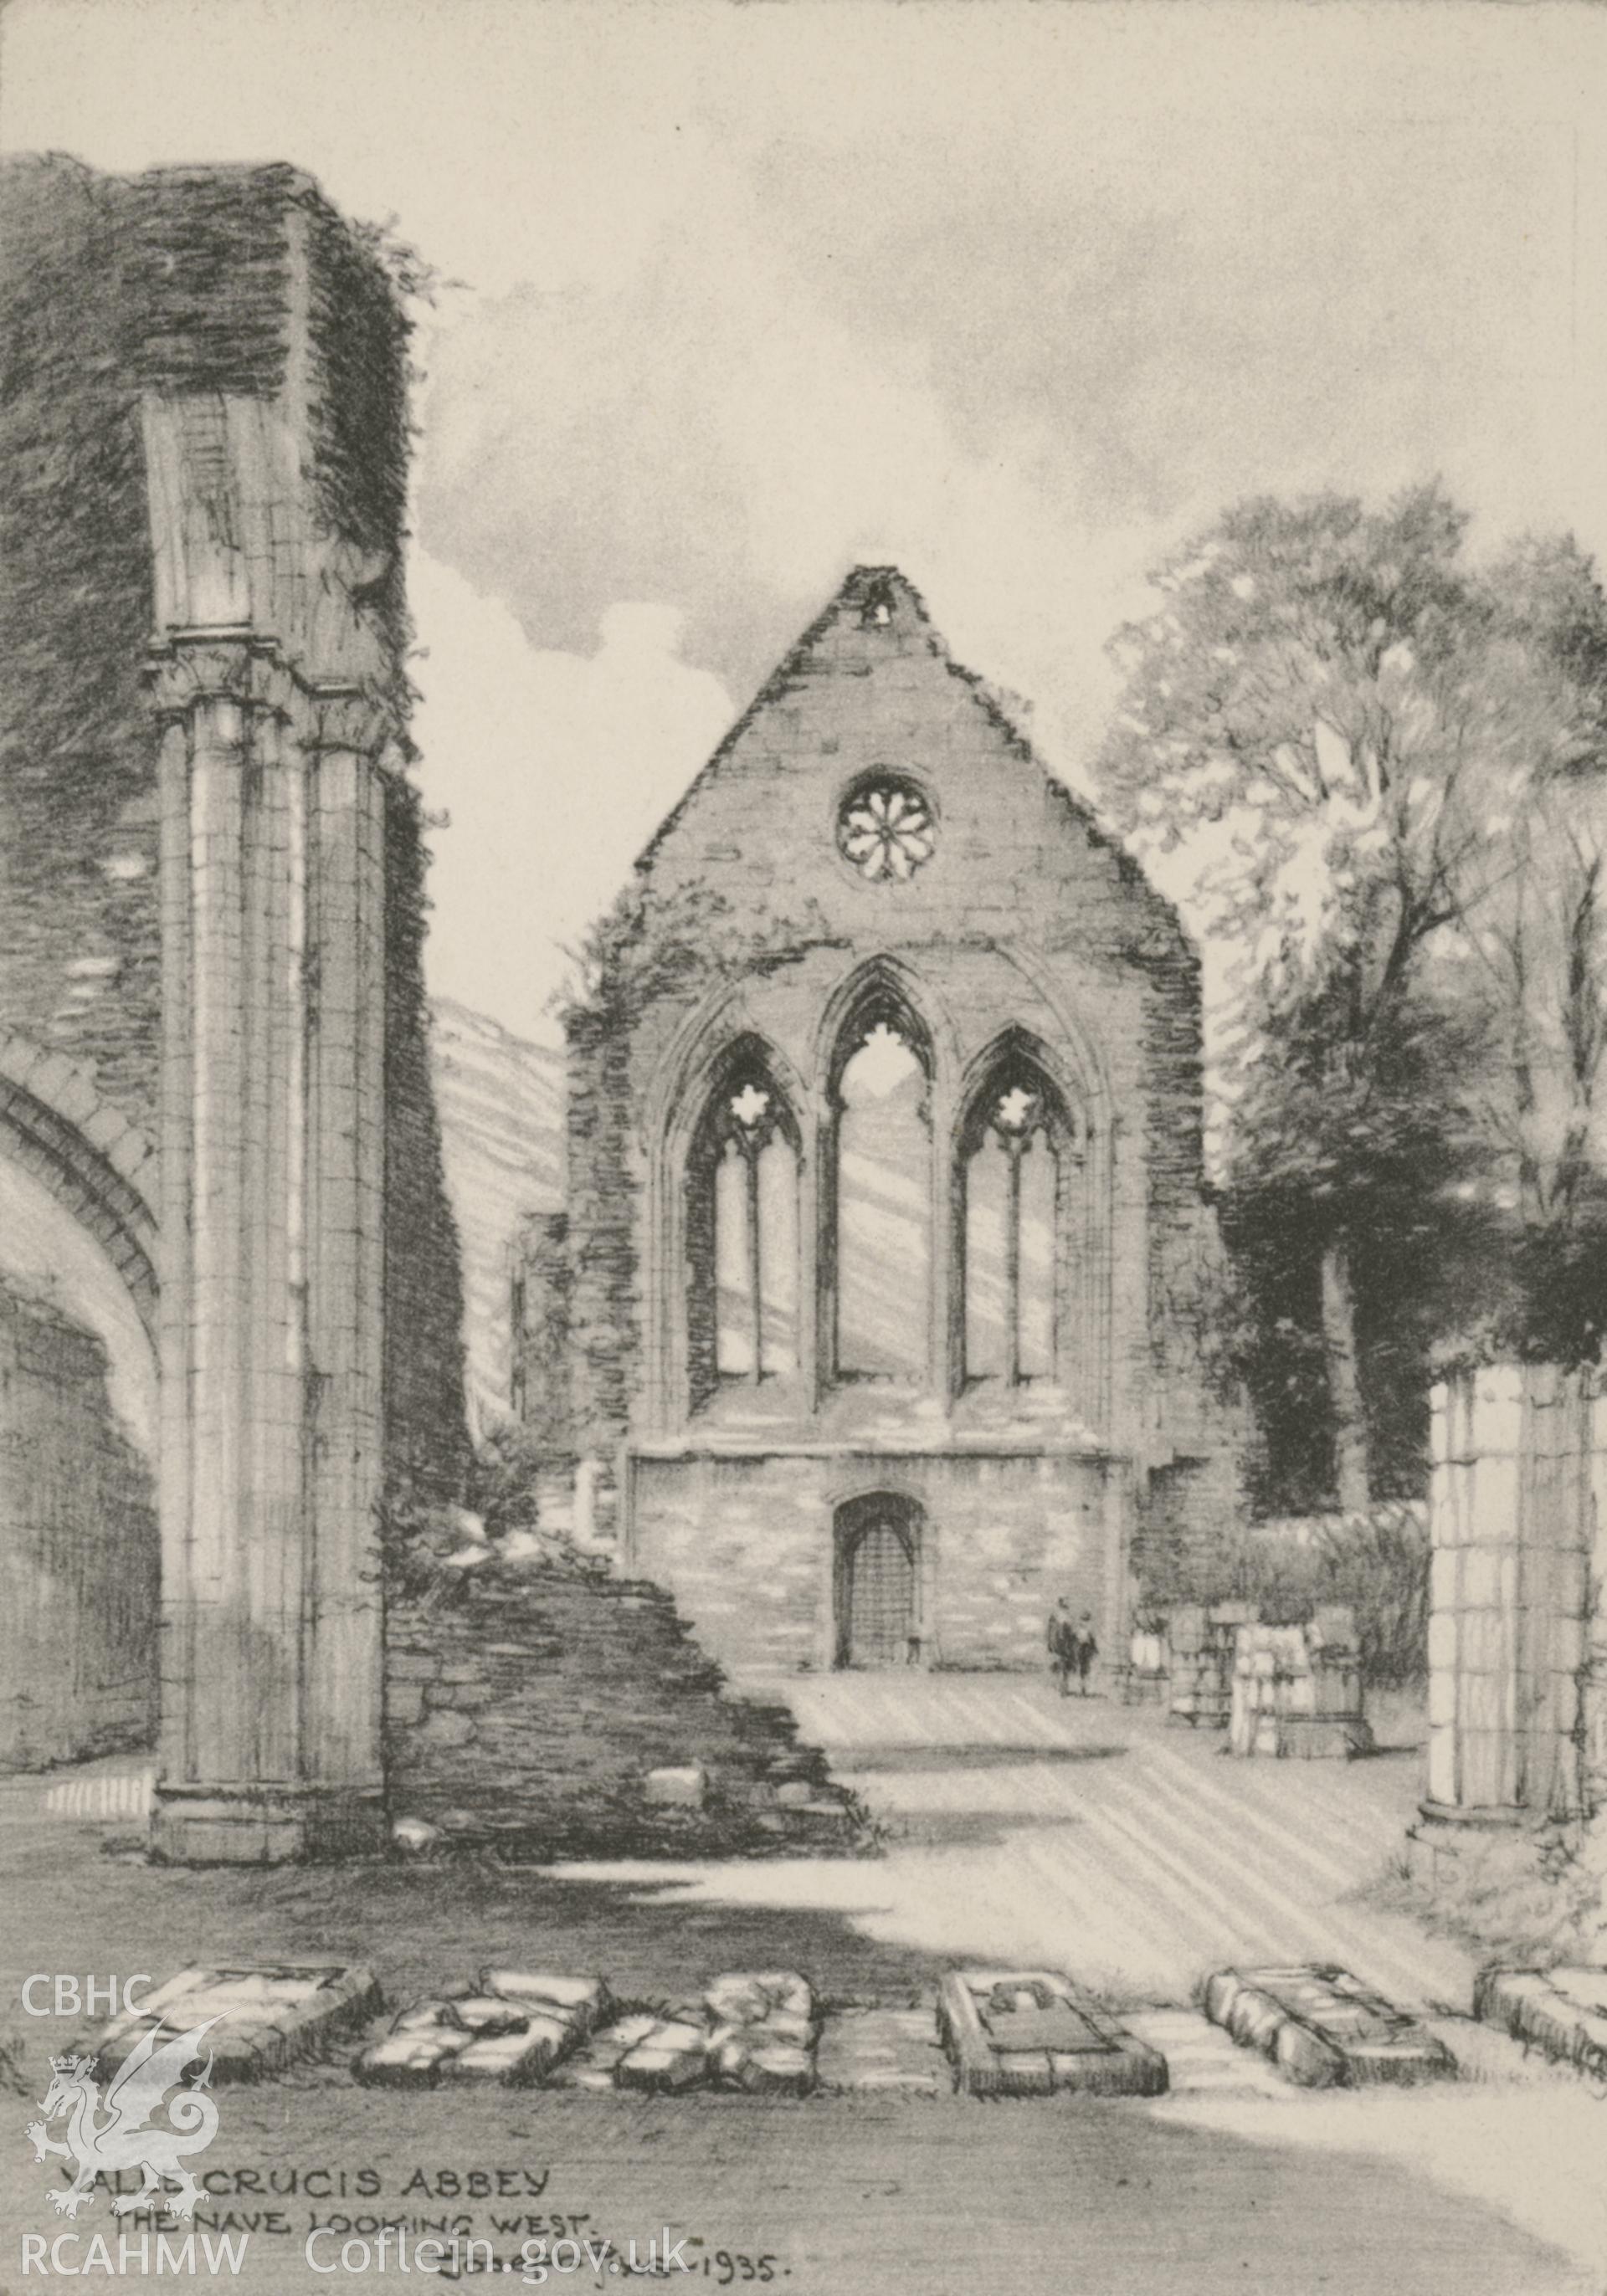 Postcard view of an early sketch of Valle Crucis Abbey.